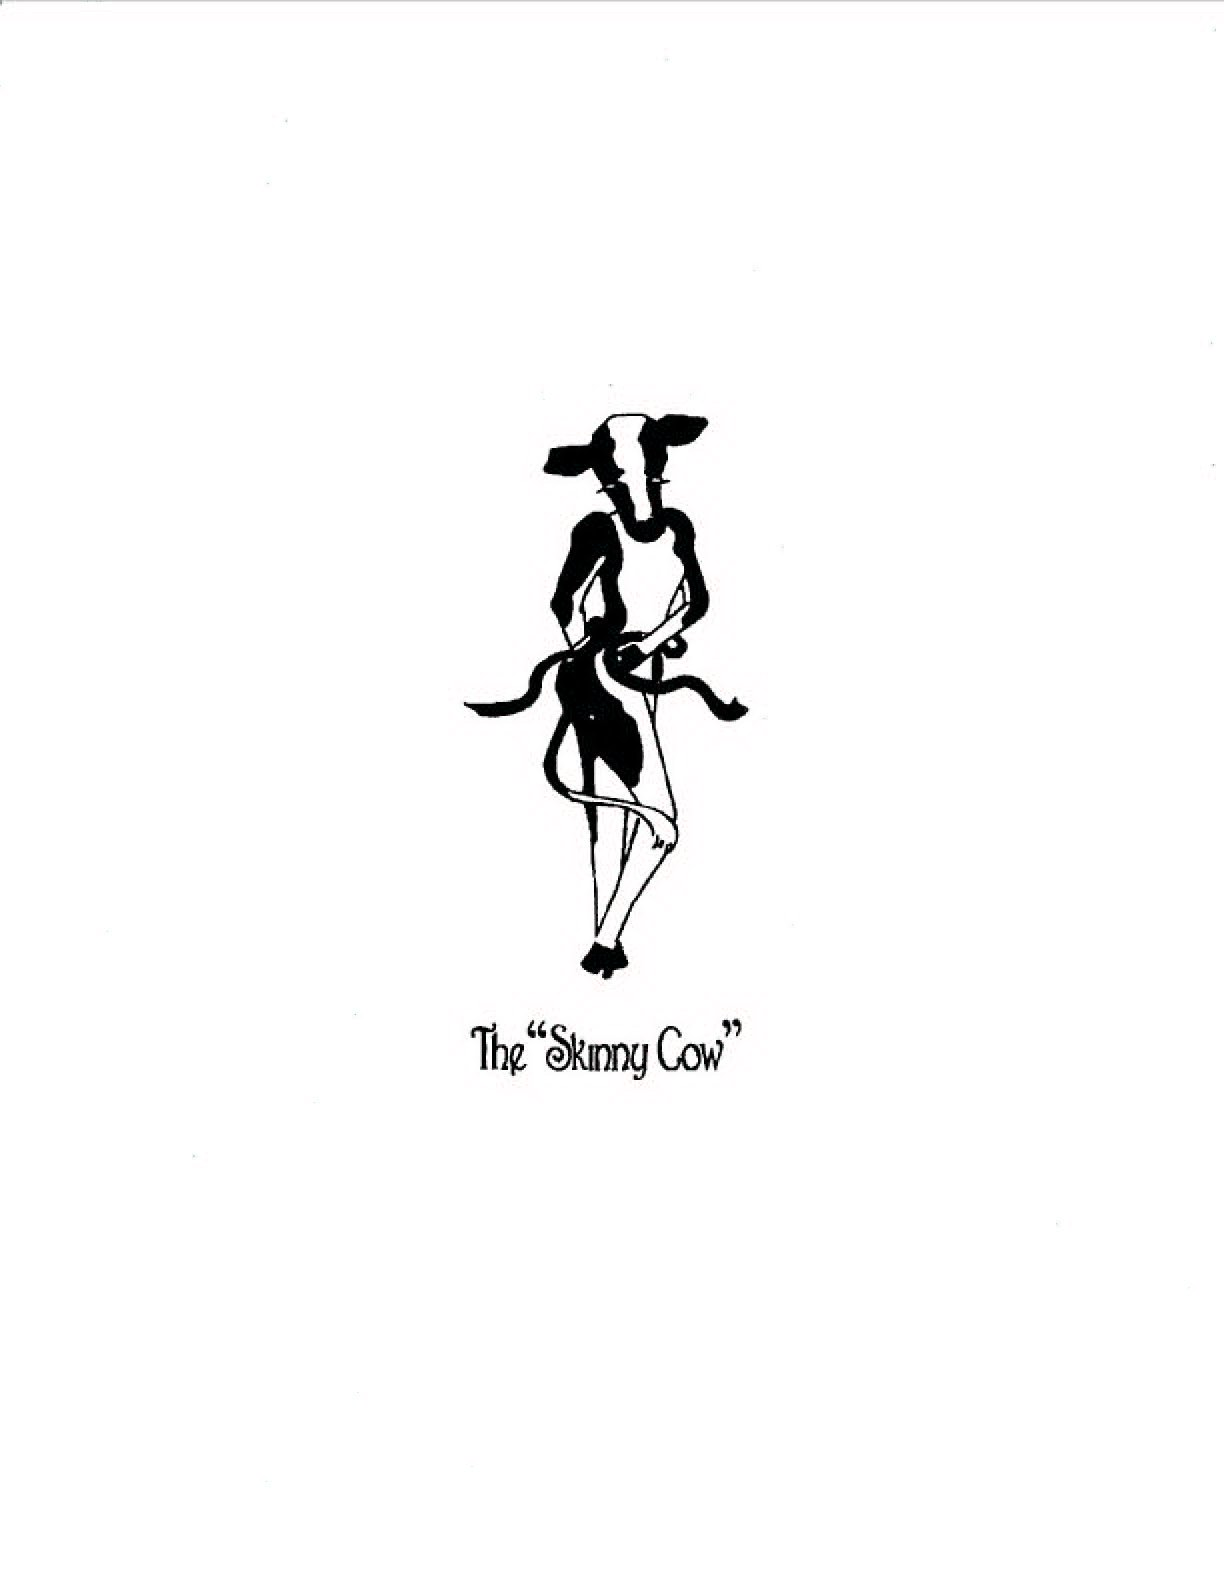  THE "SKINNY COW"